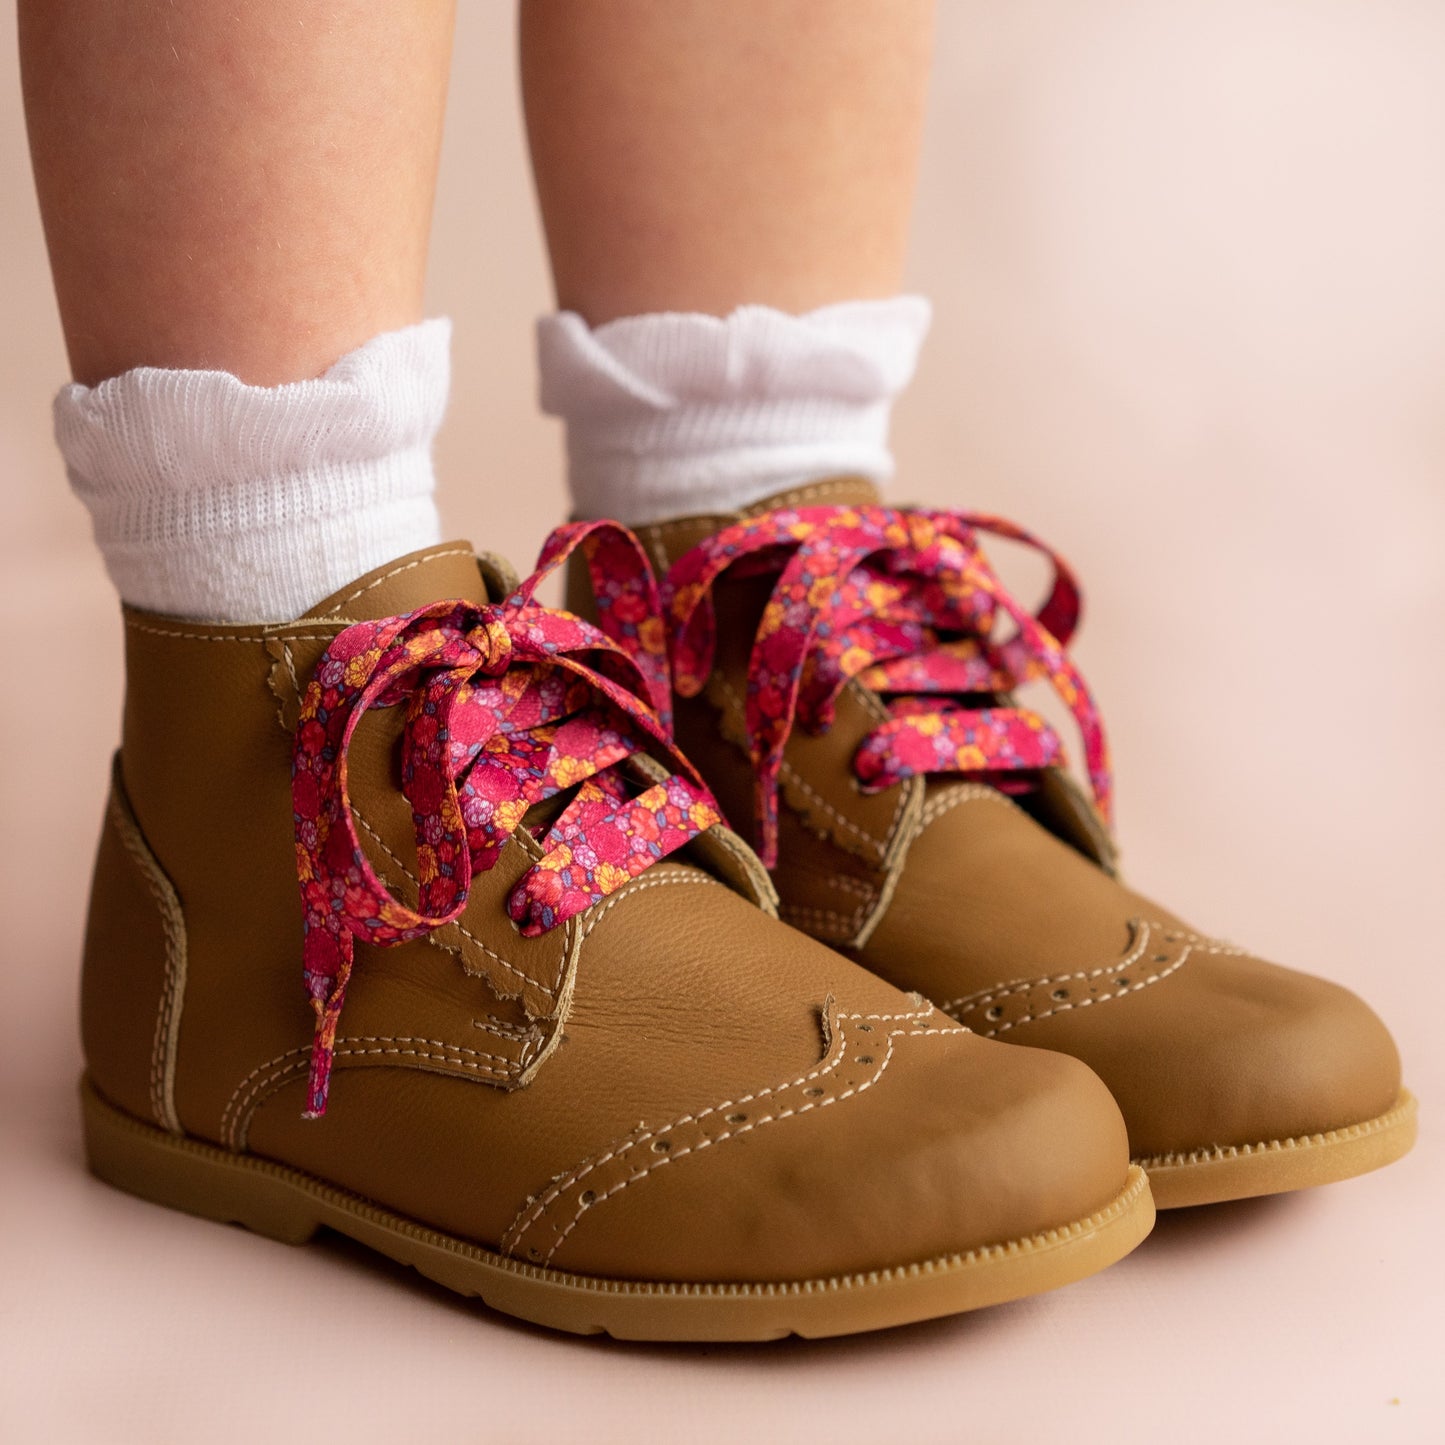 Ruffle Anklet Socks in Bright Red  - Doodlebug's Children's Boutique